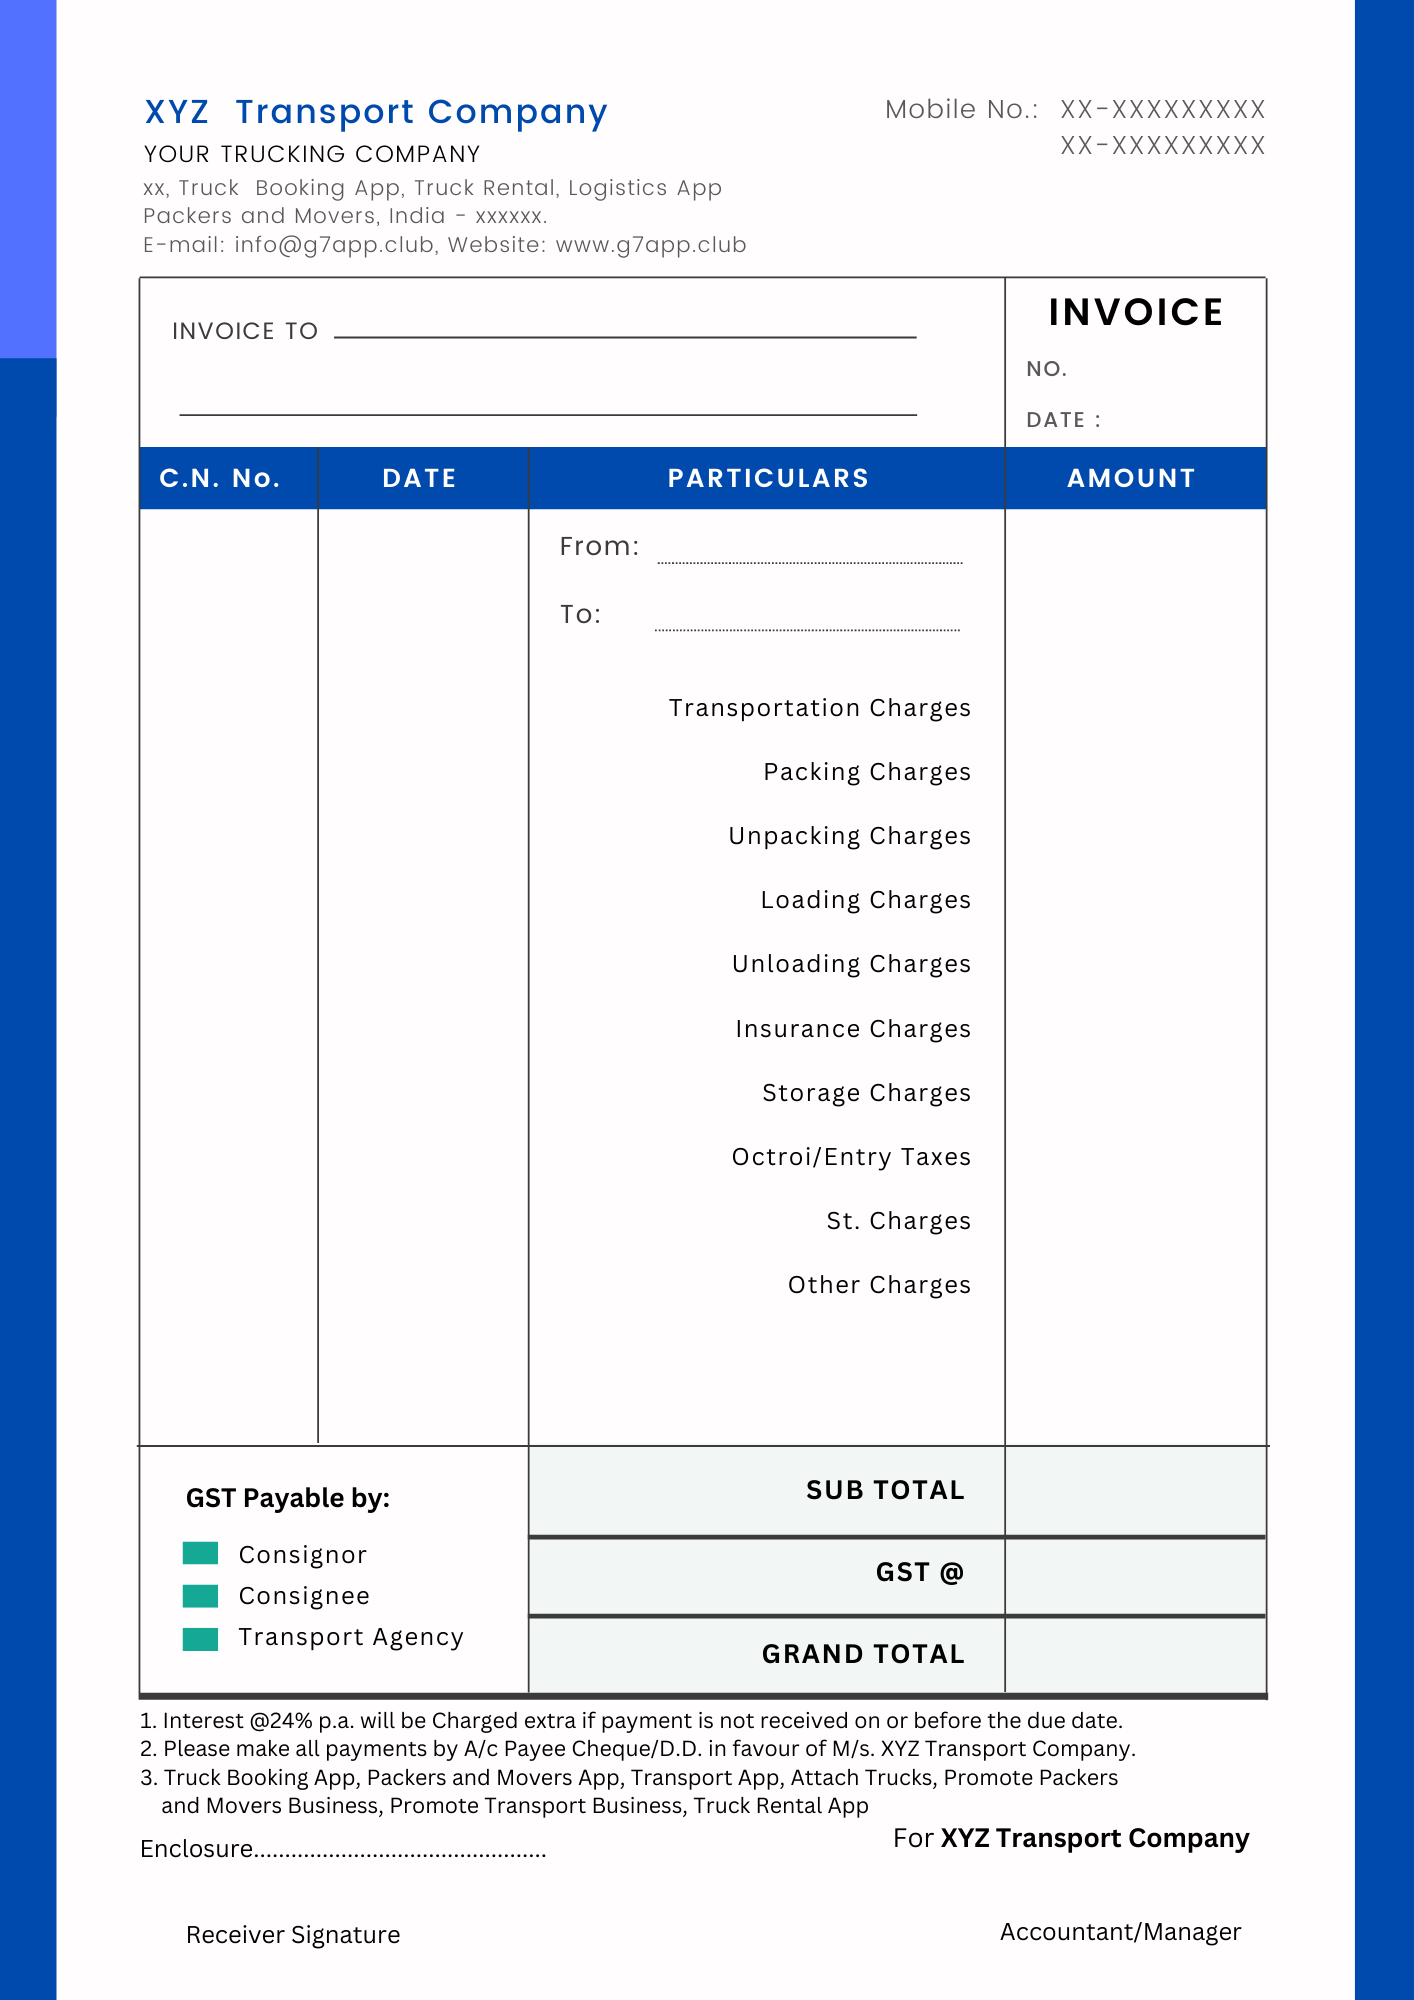 'png Format of Transport Companies Invoice and Bill'